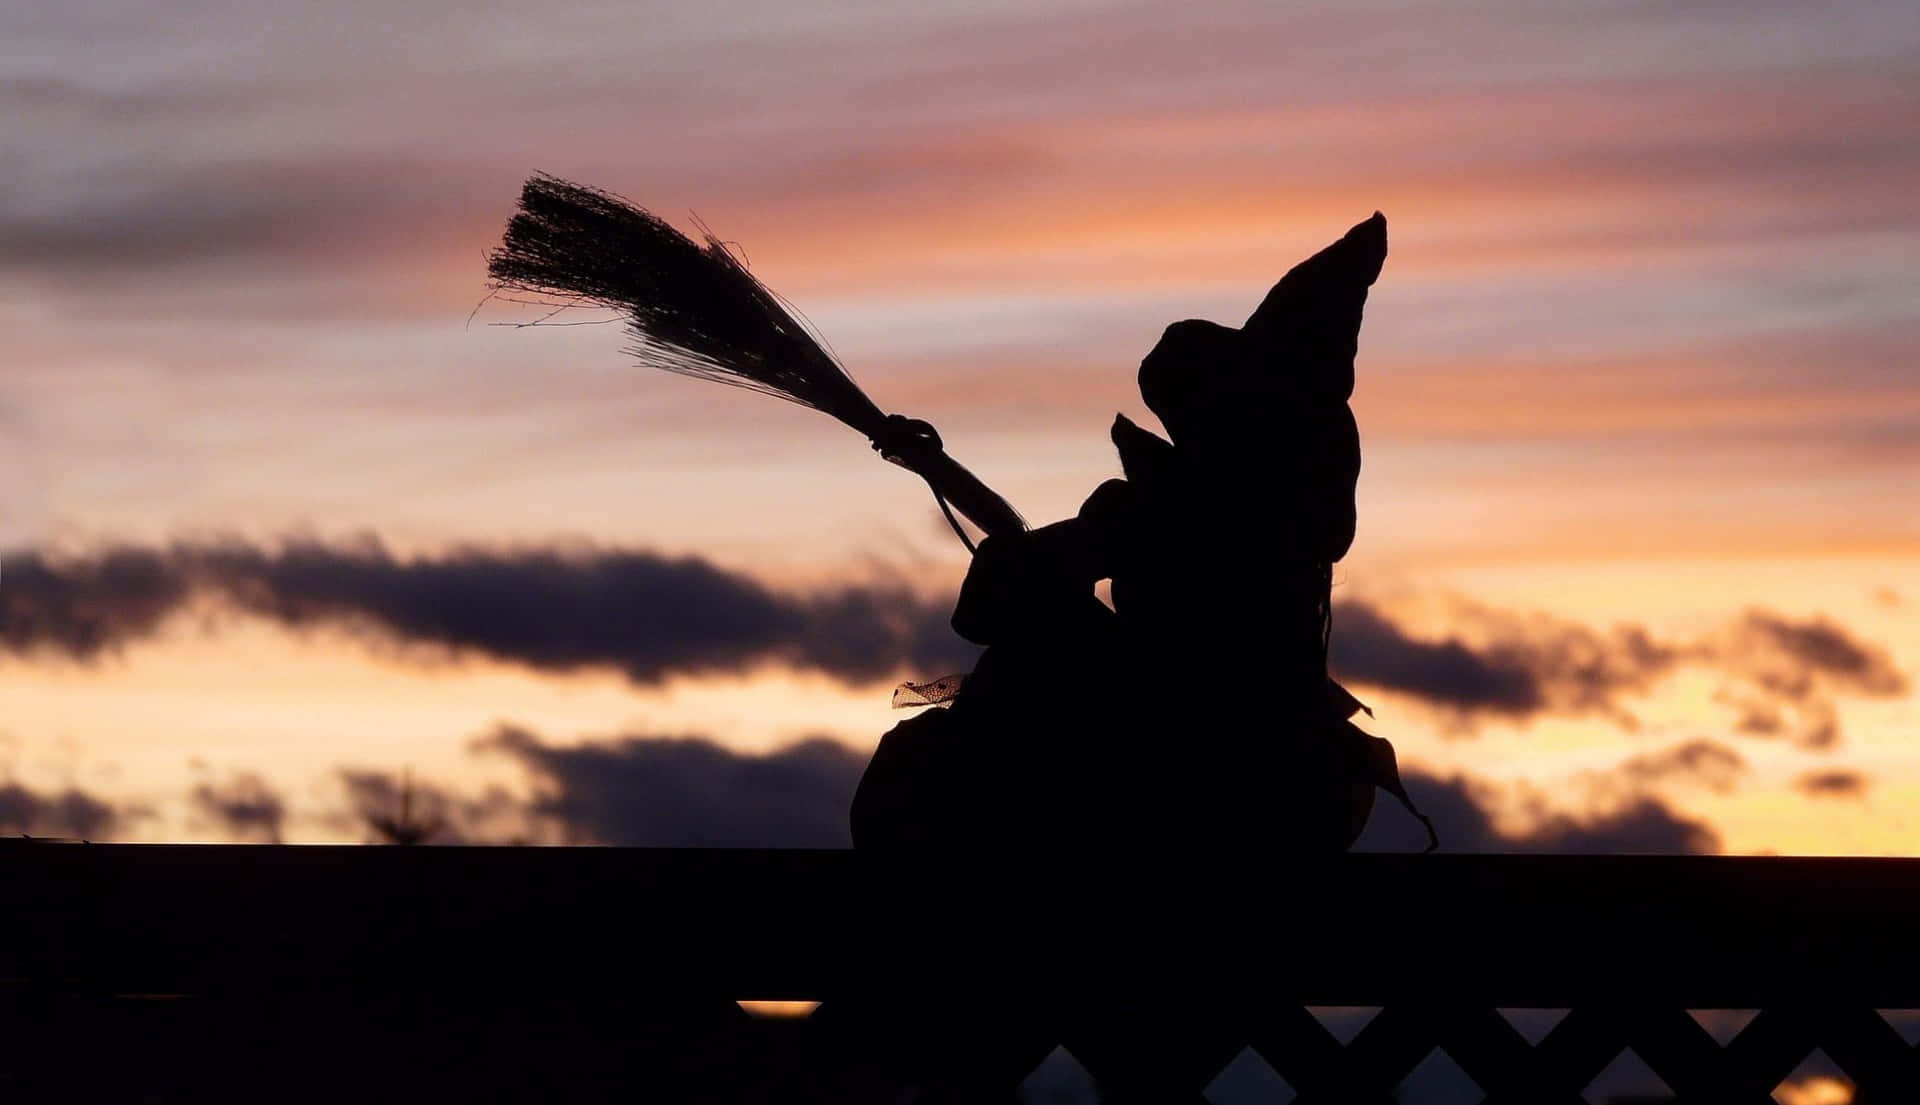 Sunset Sky Halloween Witch Silhouette Wallpaper